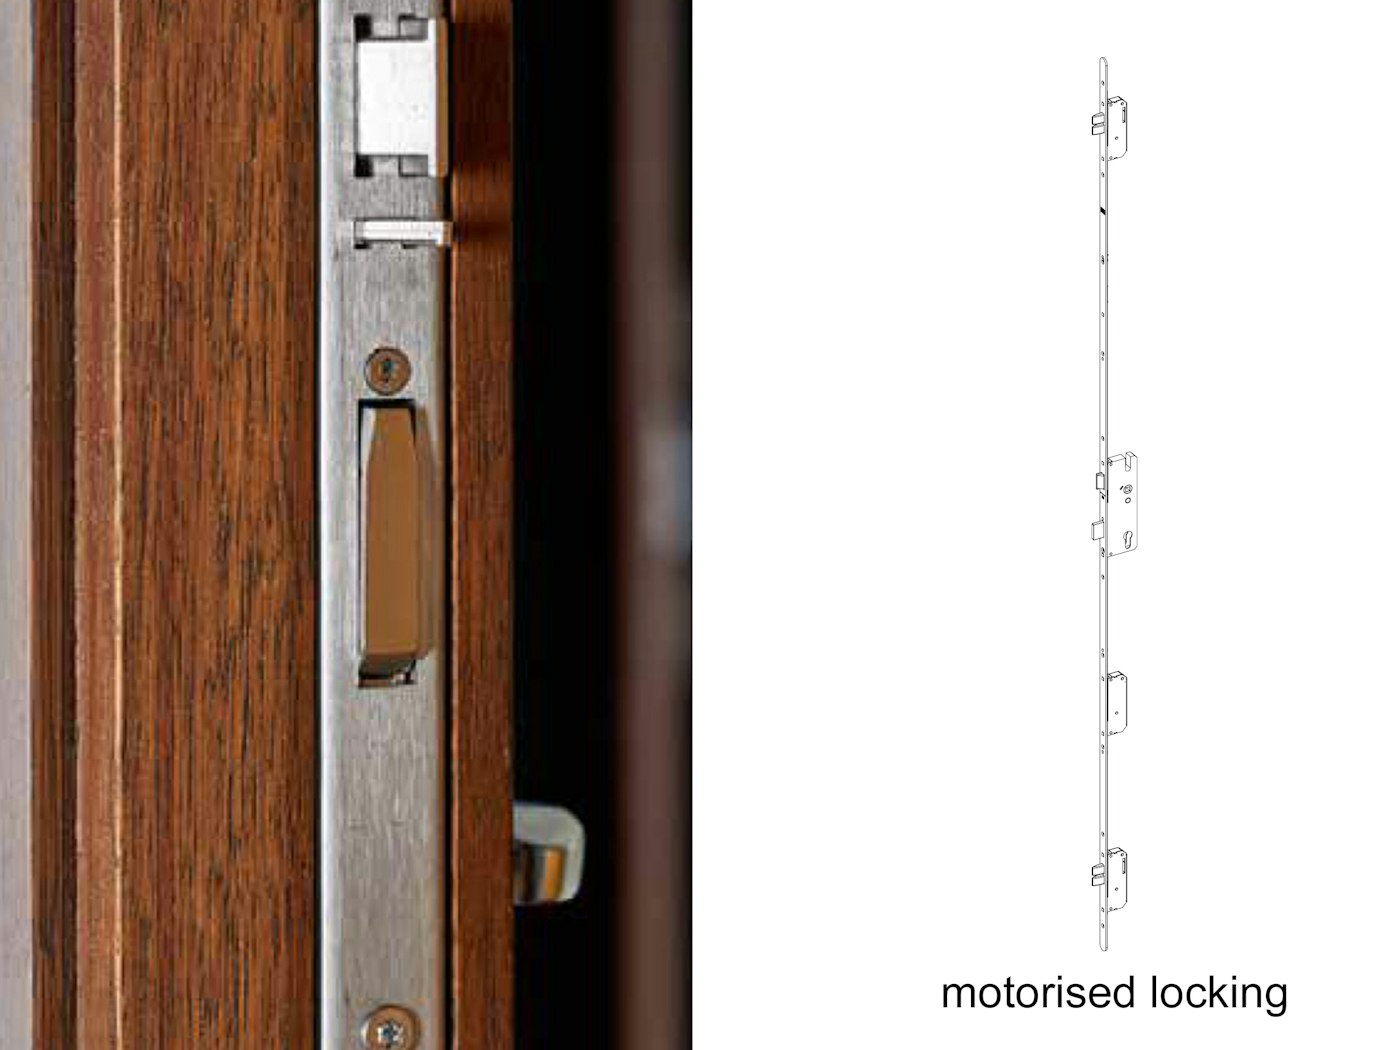 You can also upgrade to self-locking or motorised locking systems